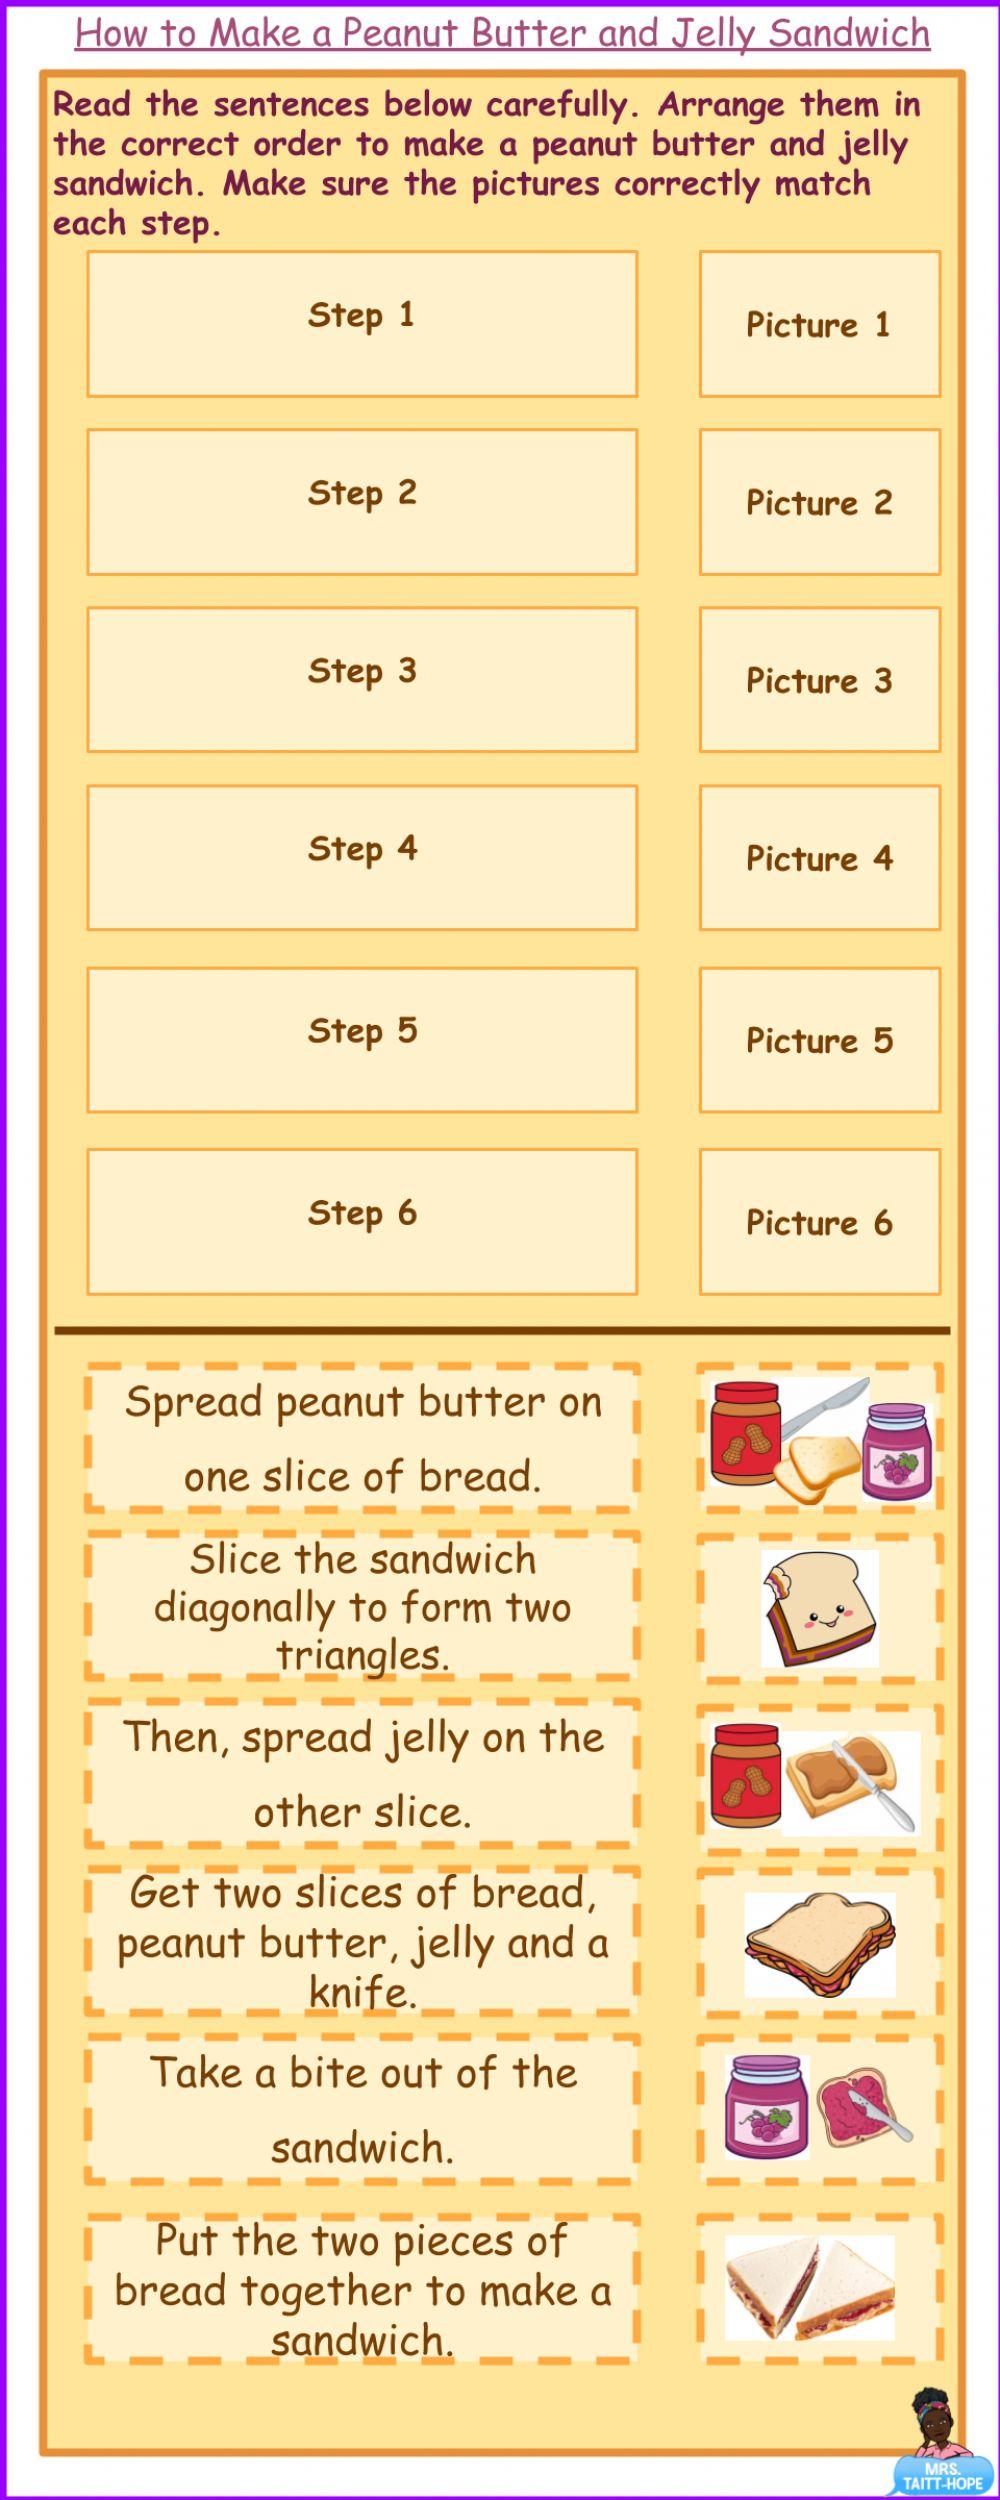 Peanut Butter and Jelly Sandwich Sequencing Activity